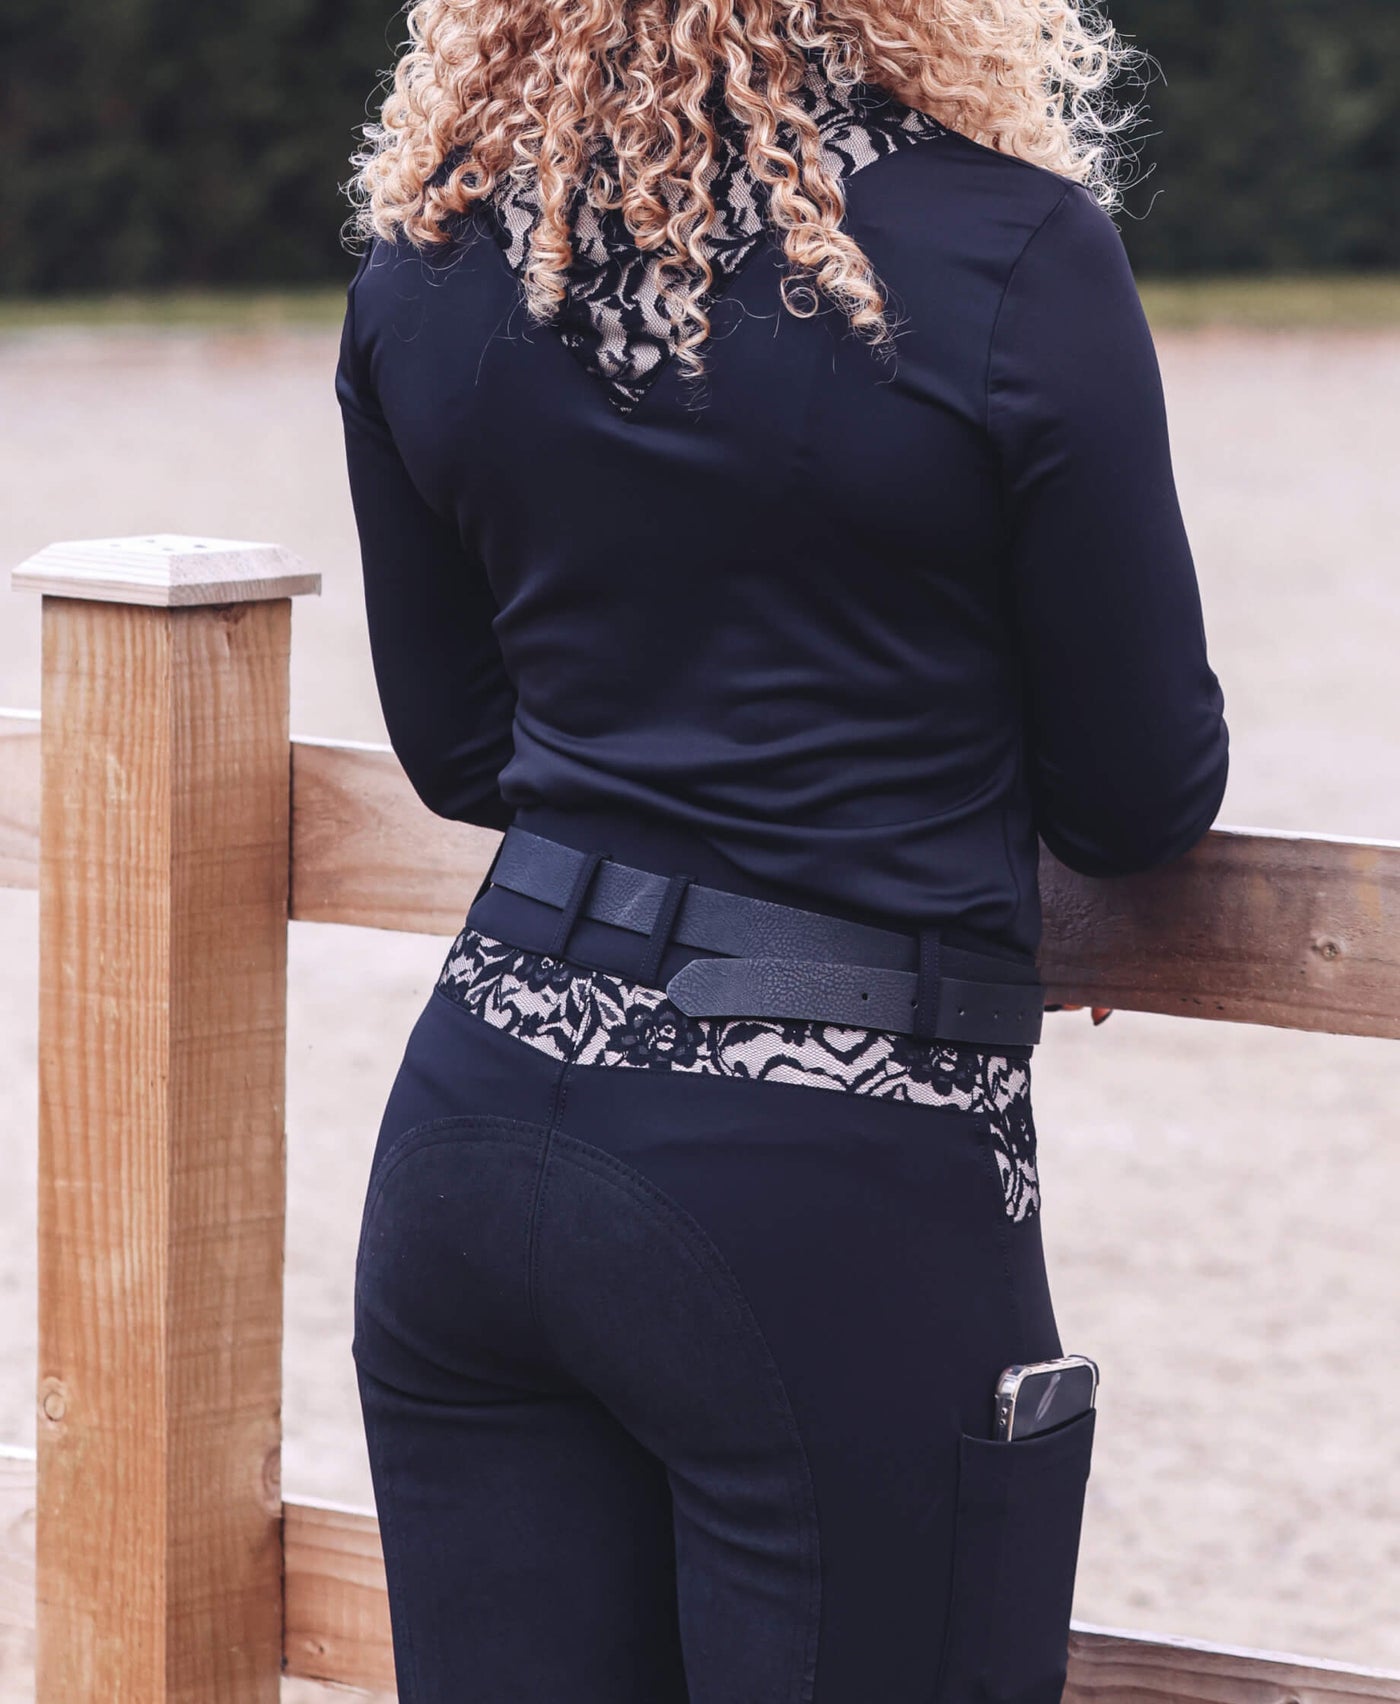 Jet Lace Breeches